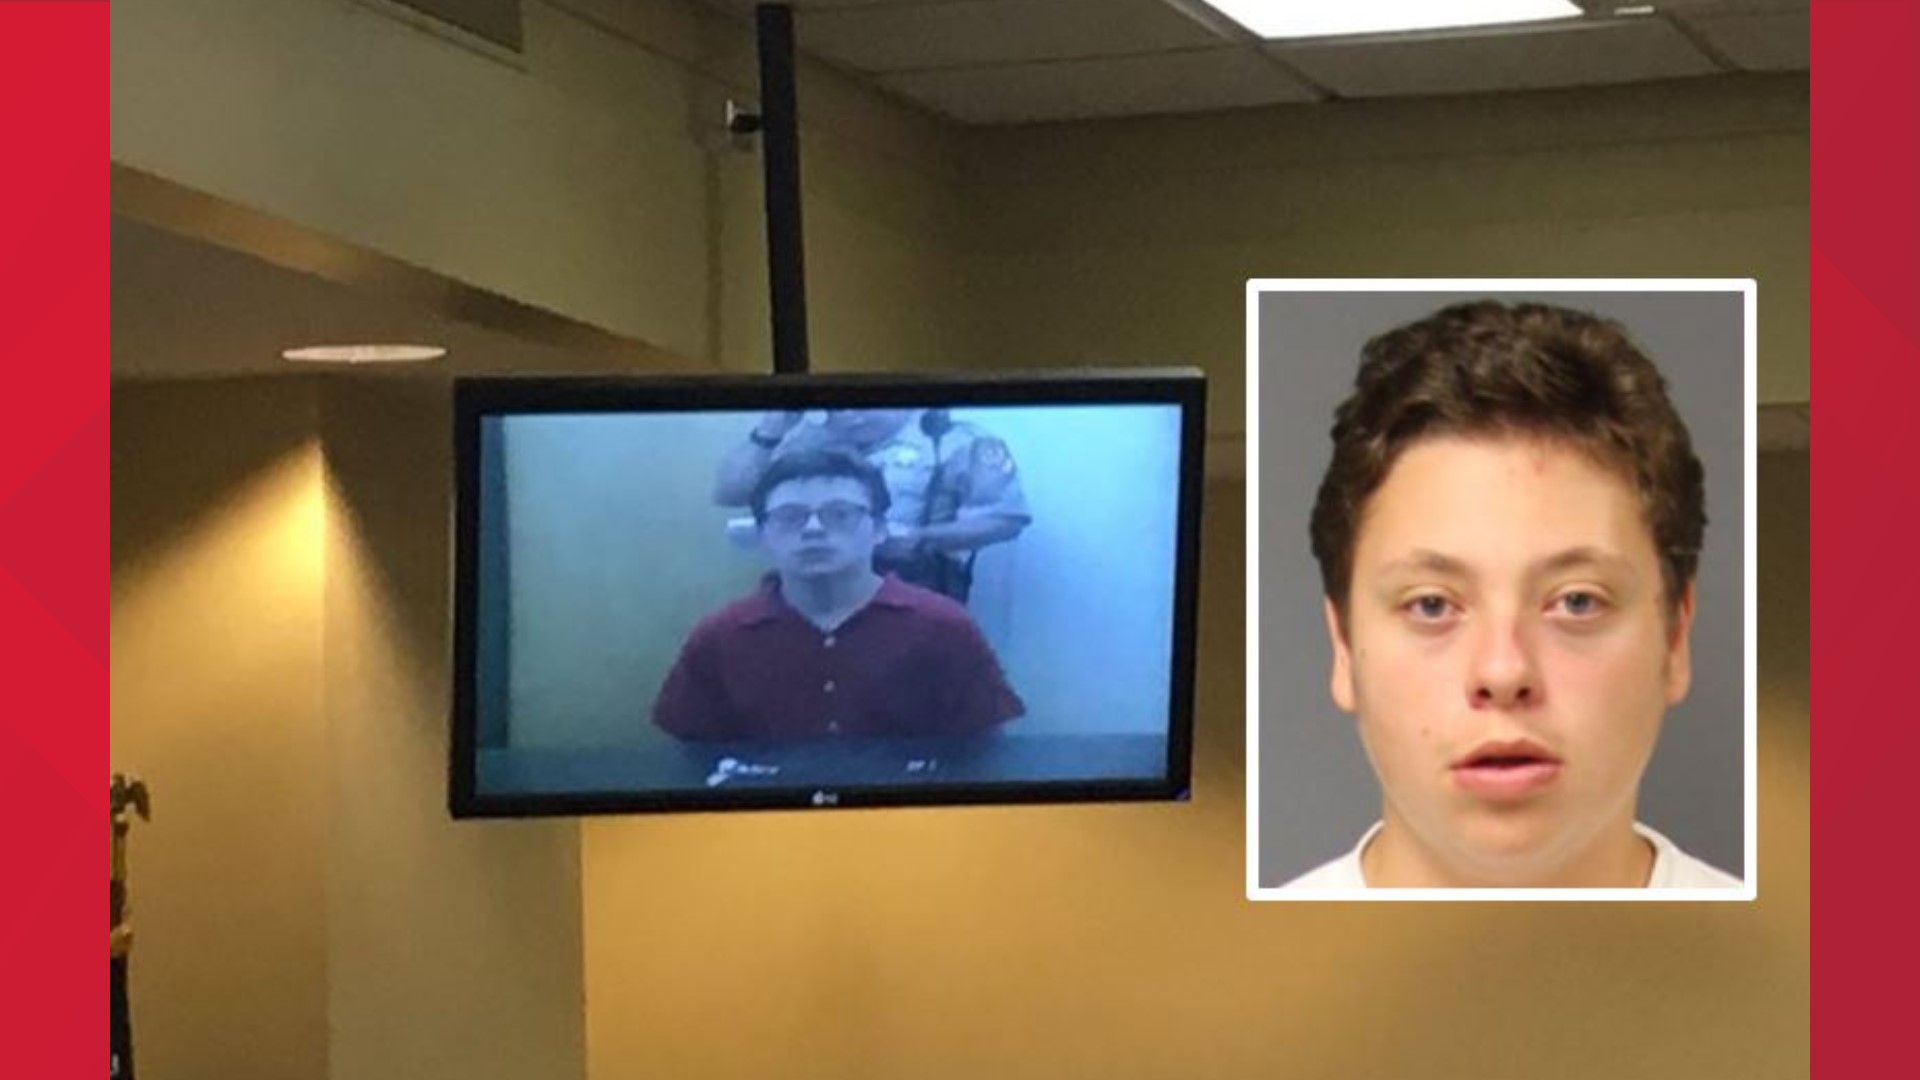 19-year-old Paul Steber is facing charges of bringing guns to school -- and threatening a mass shooting.